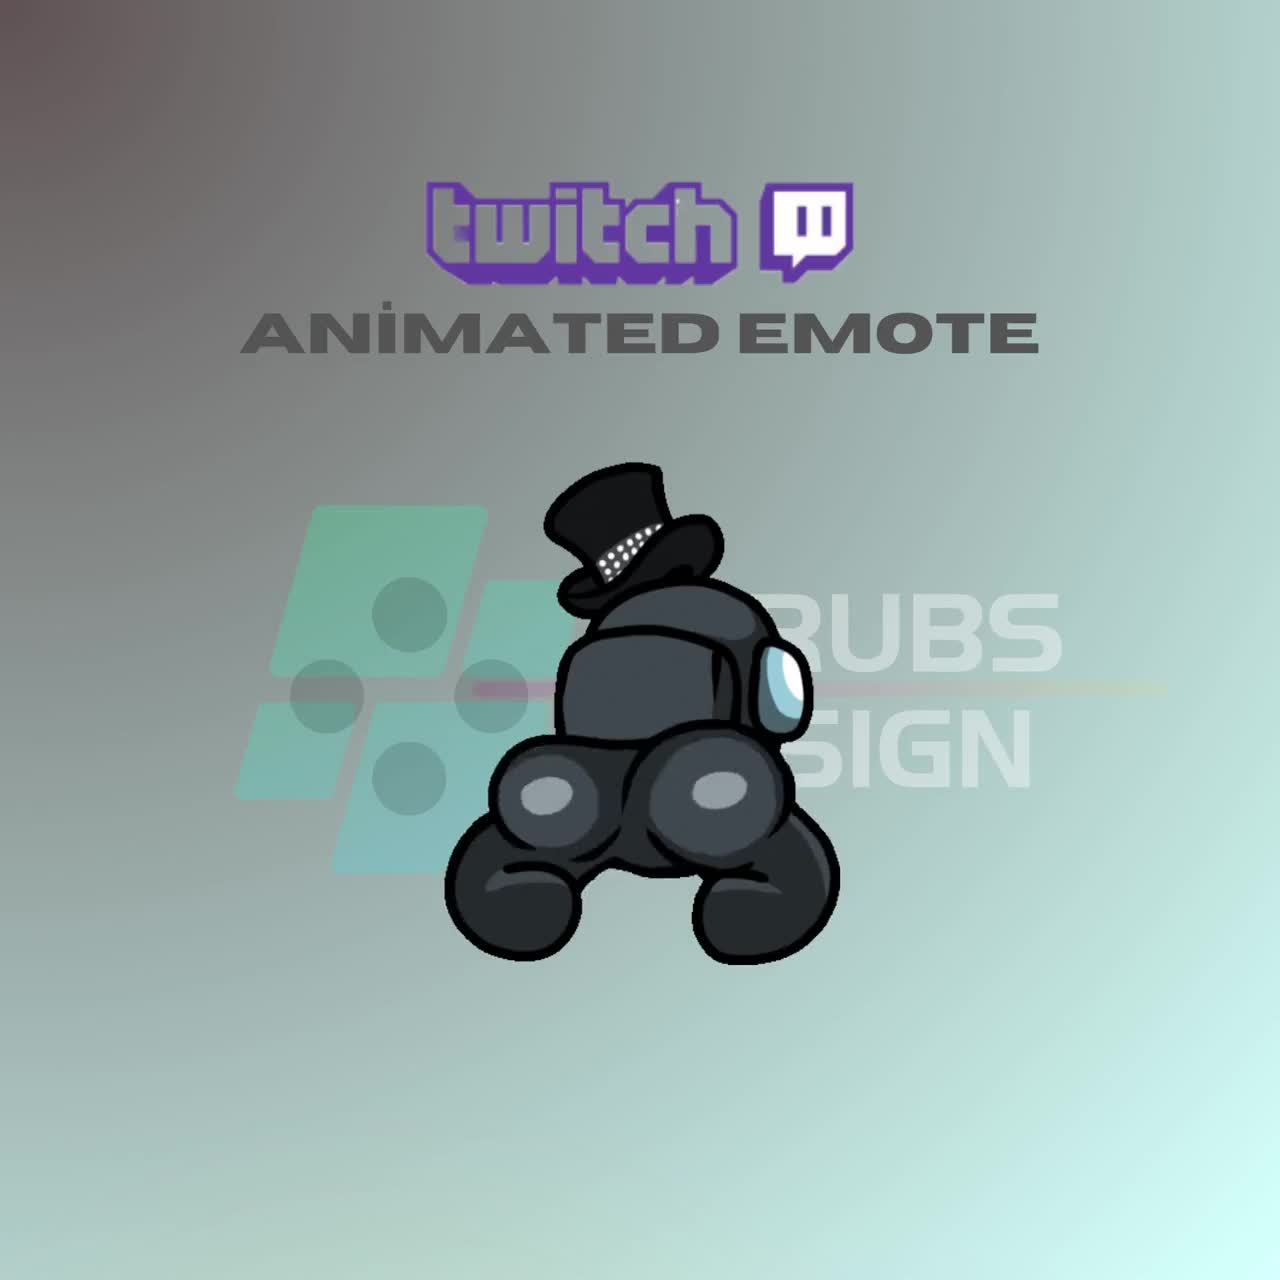 ALL COLORS Twerking Among Us Emote All Colors Twitch Discord